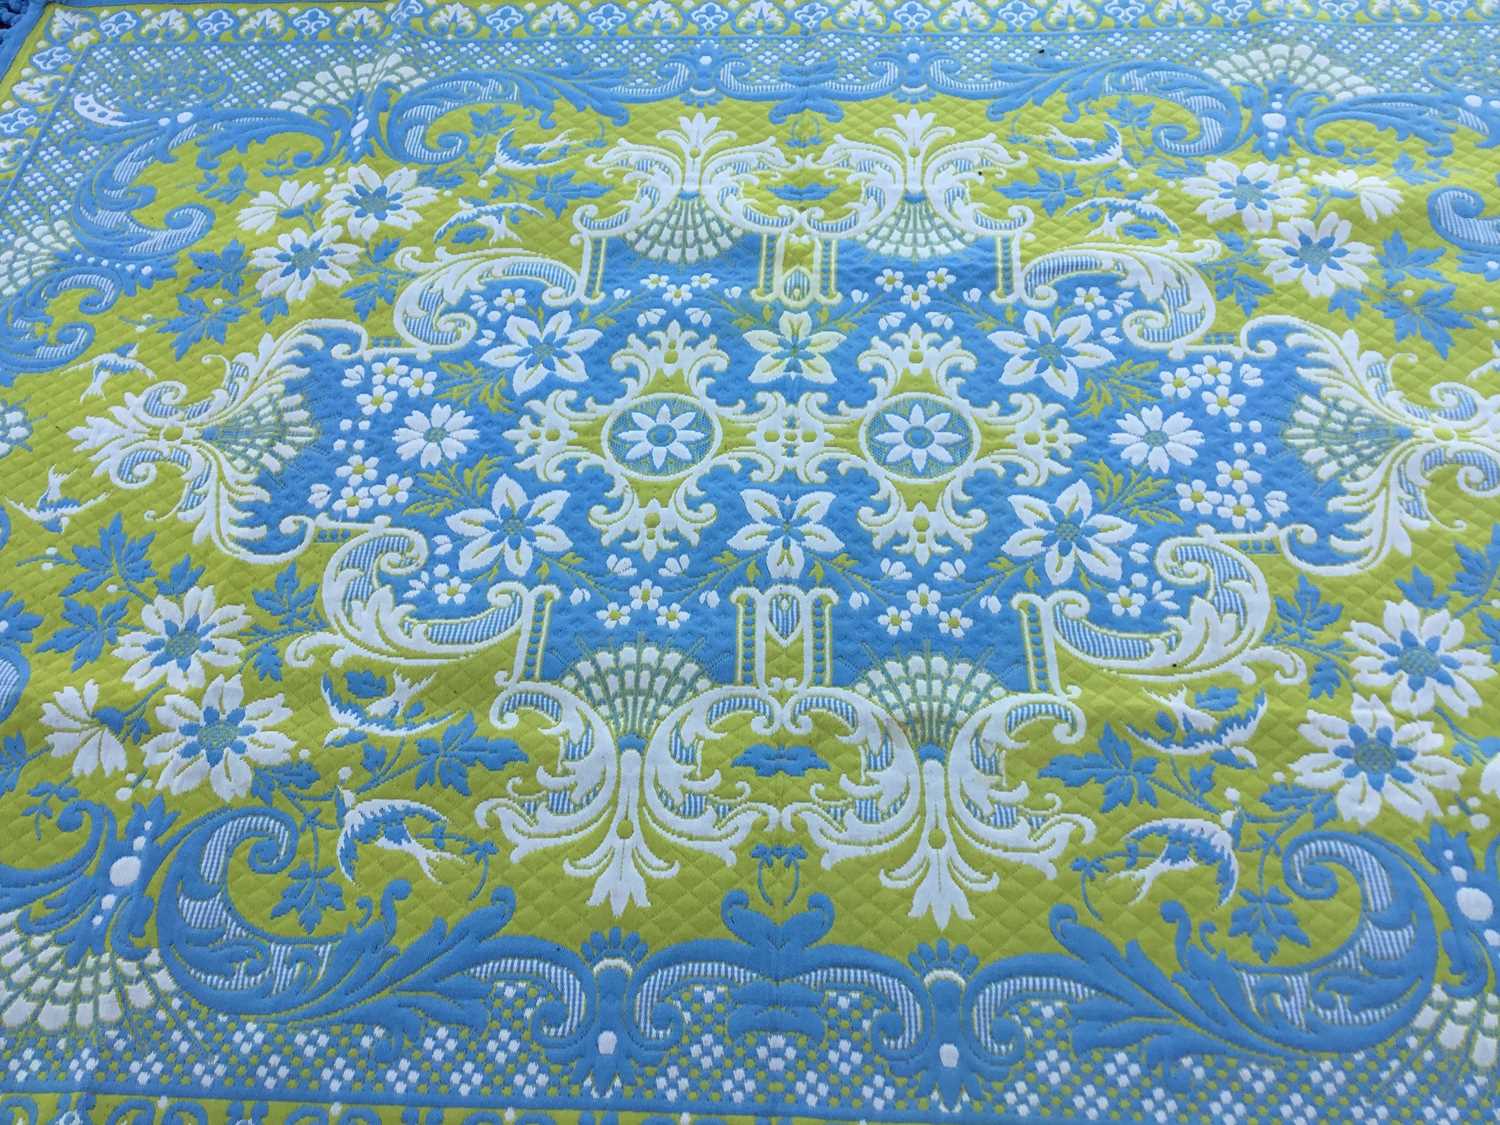 Pair of large woven rugs with foliate and scroll decoration on blue and yellow ground, each 294 x 21